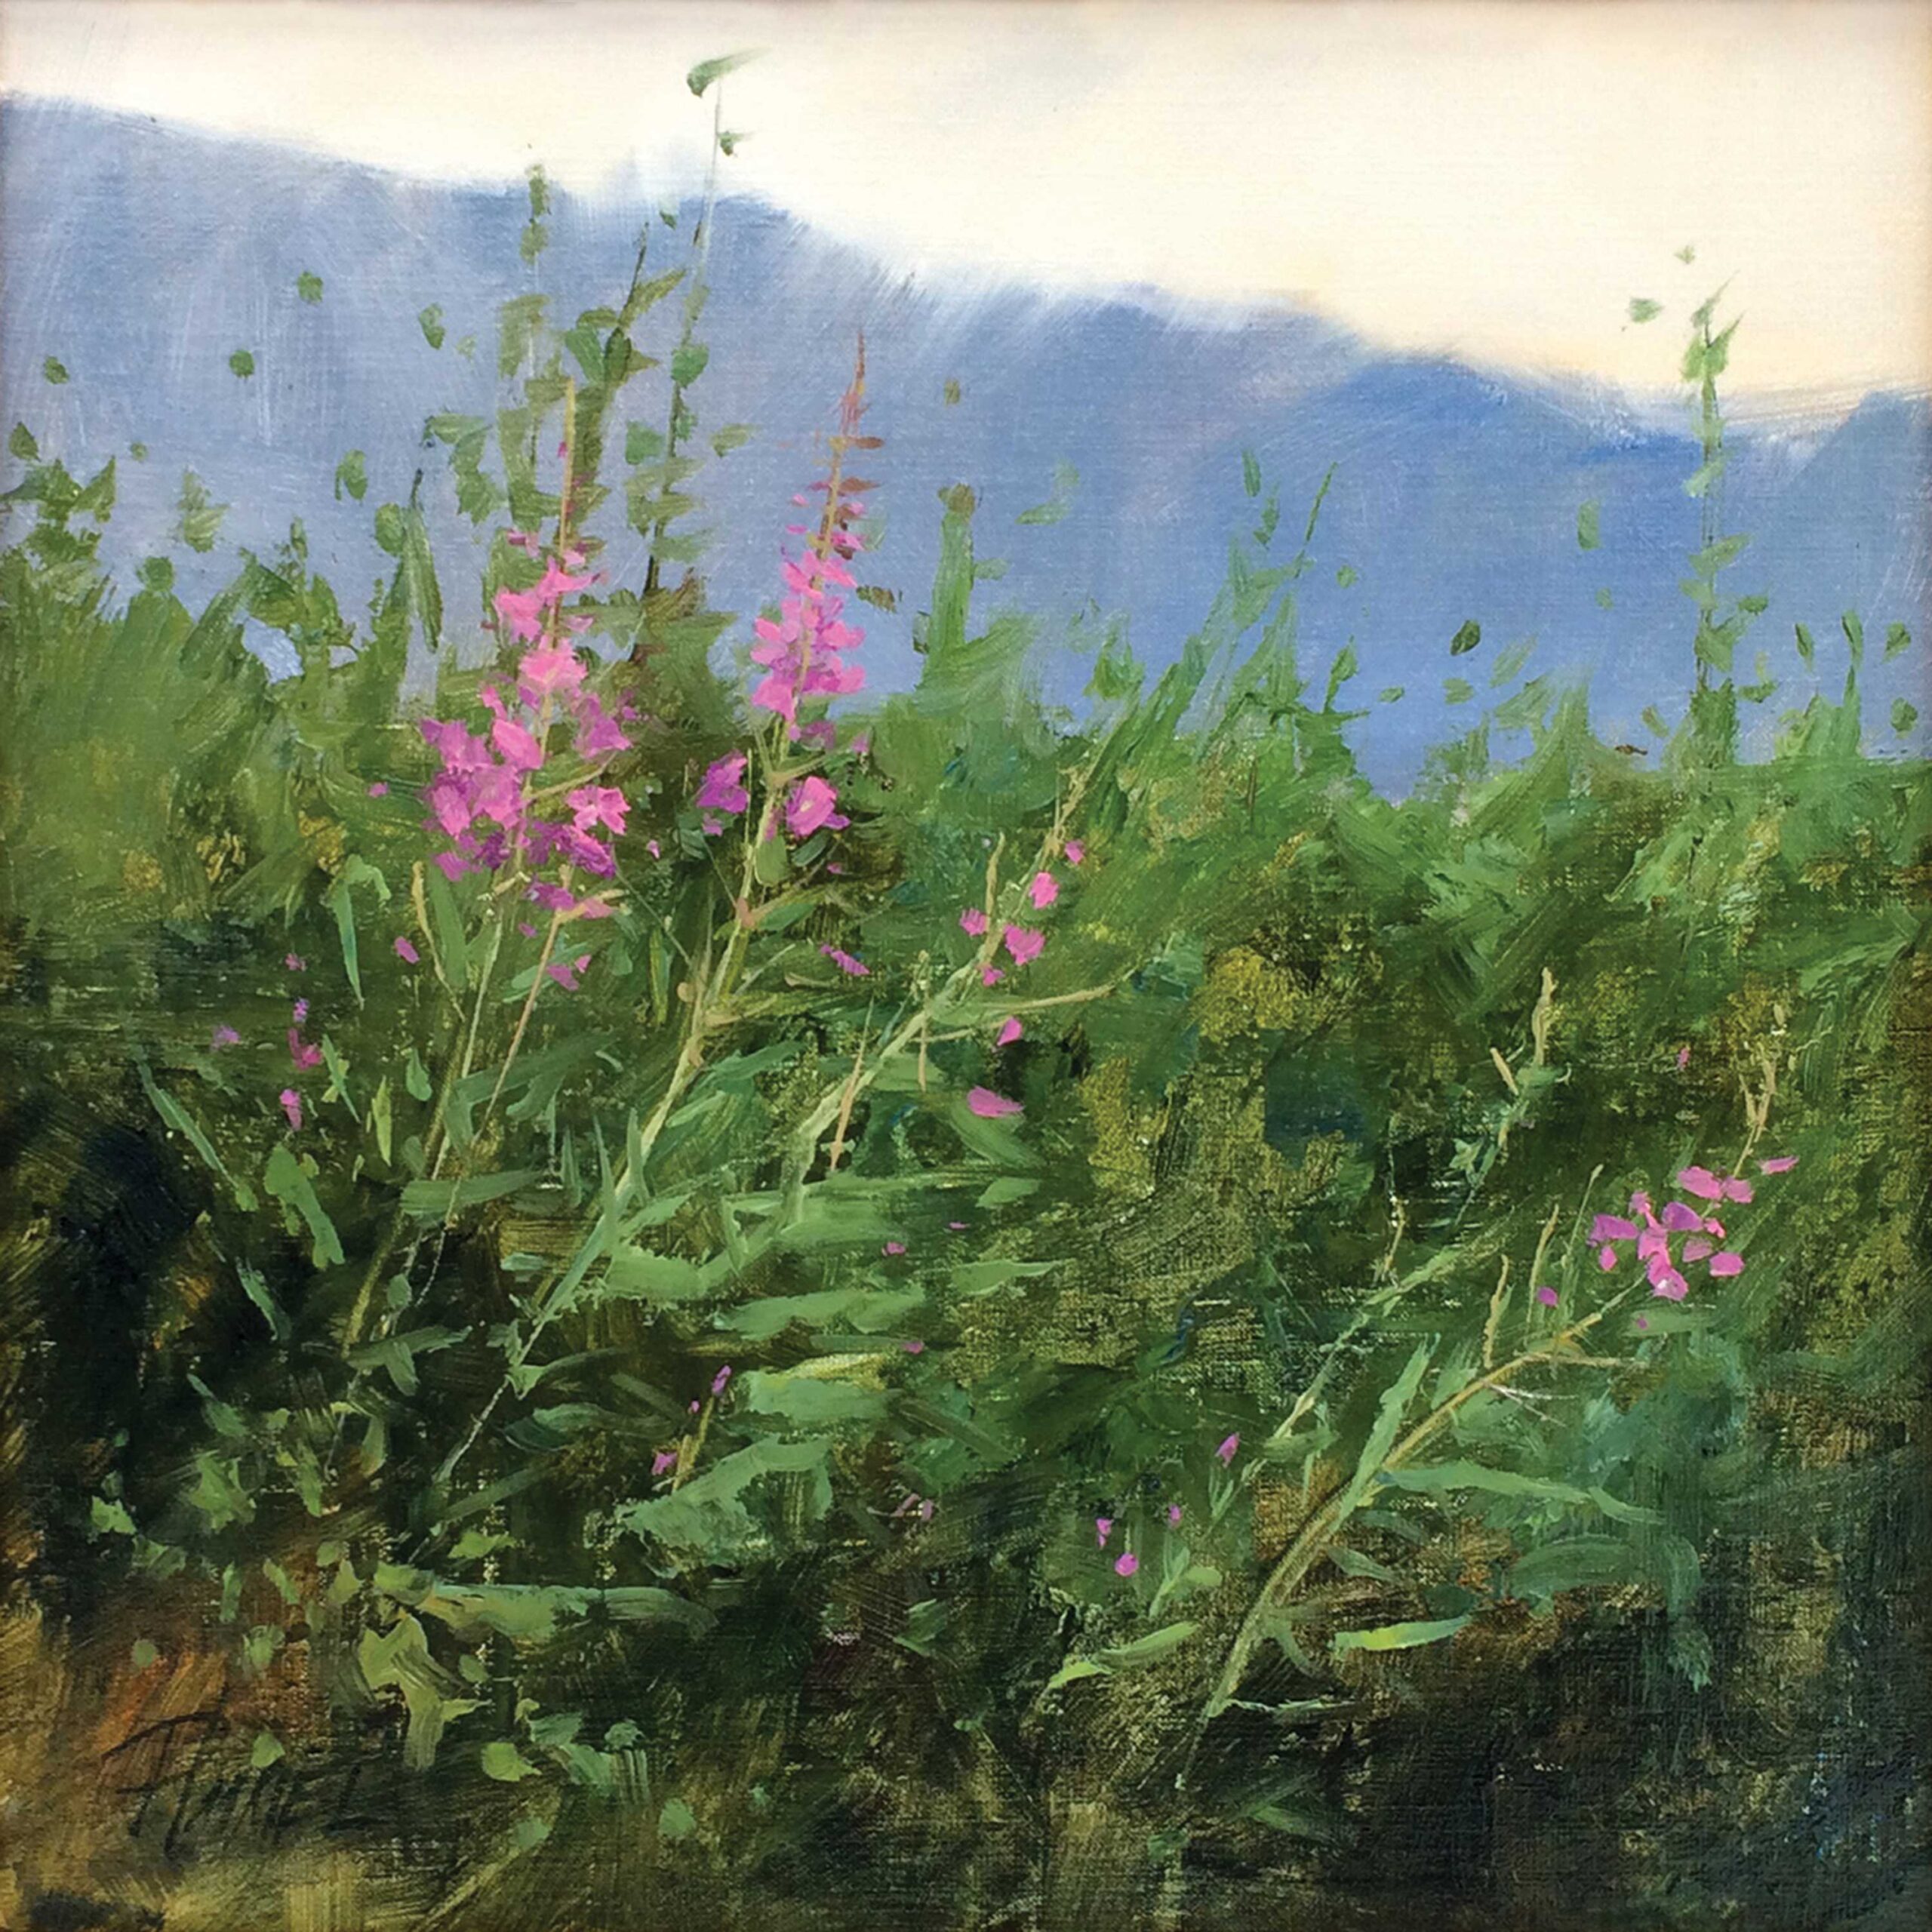 Peggy Immel, "Fireweed," 2018, oil, 12 x 12 in., private collection, plein air